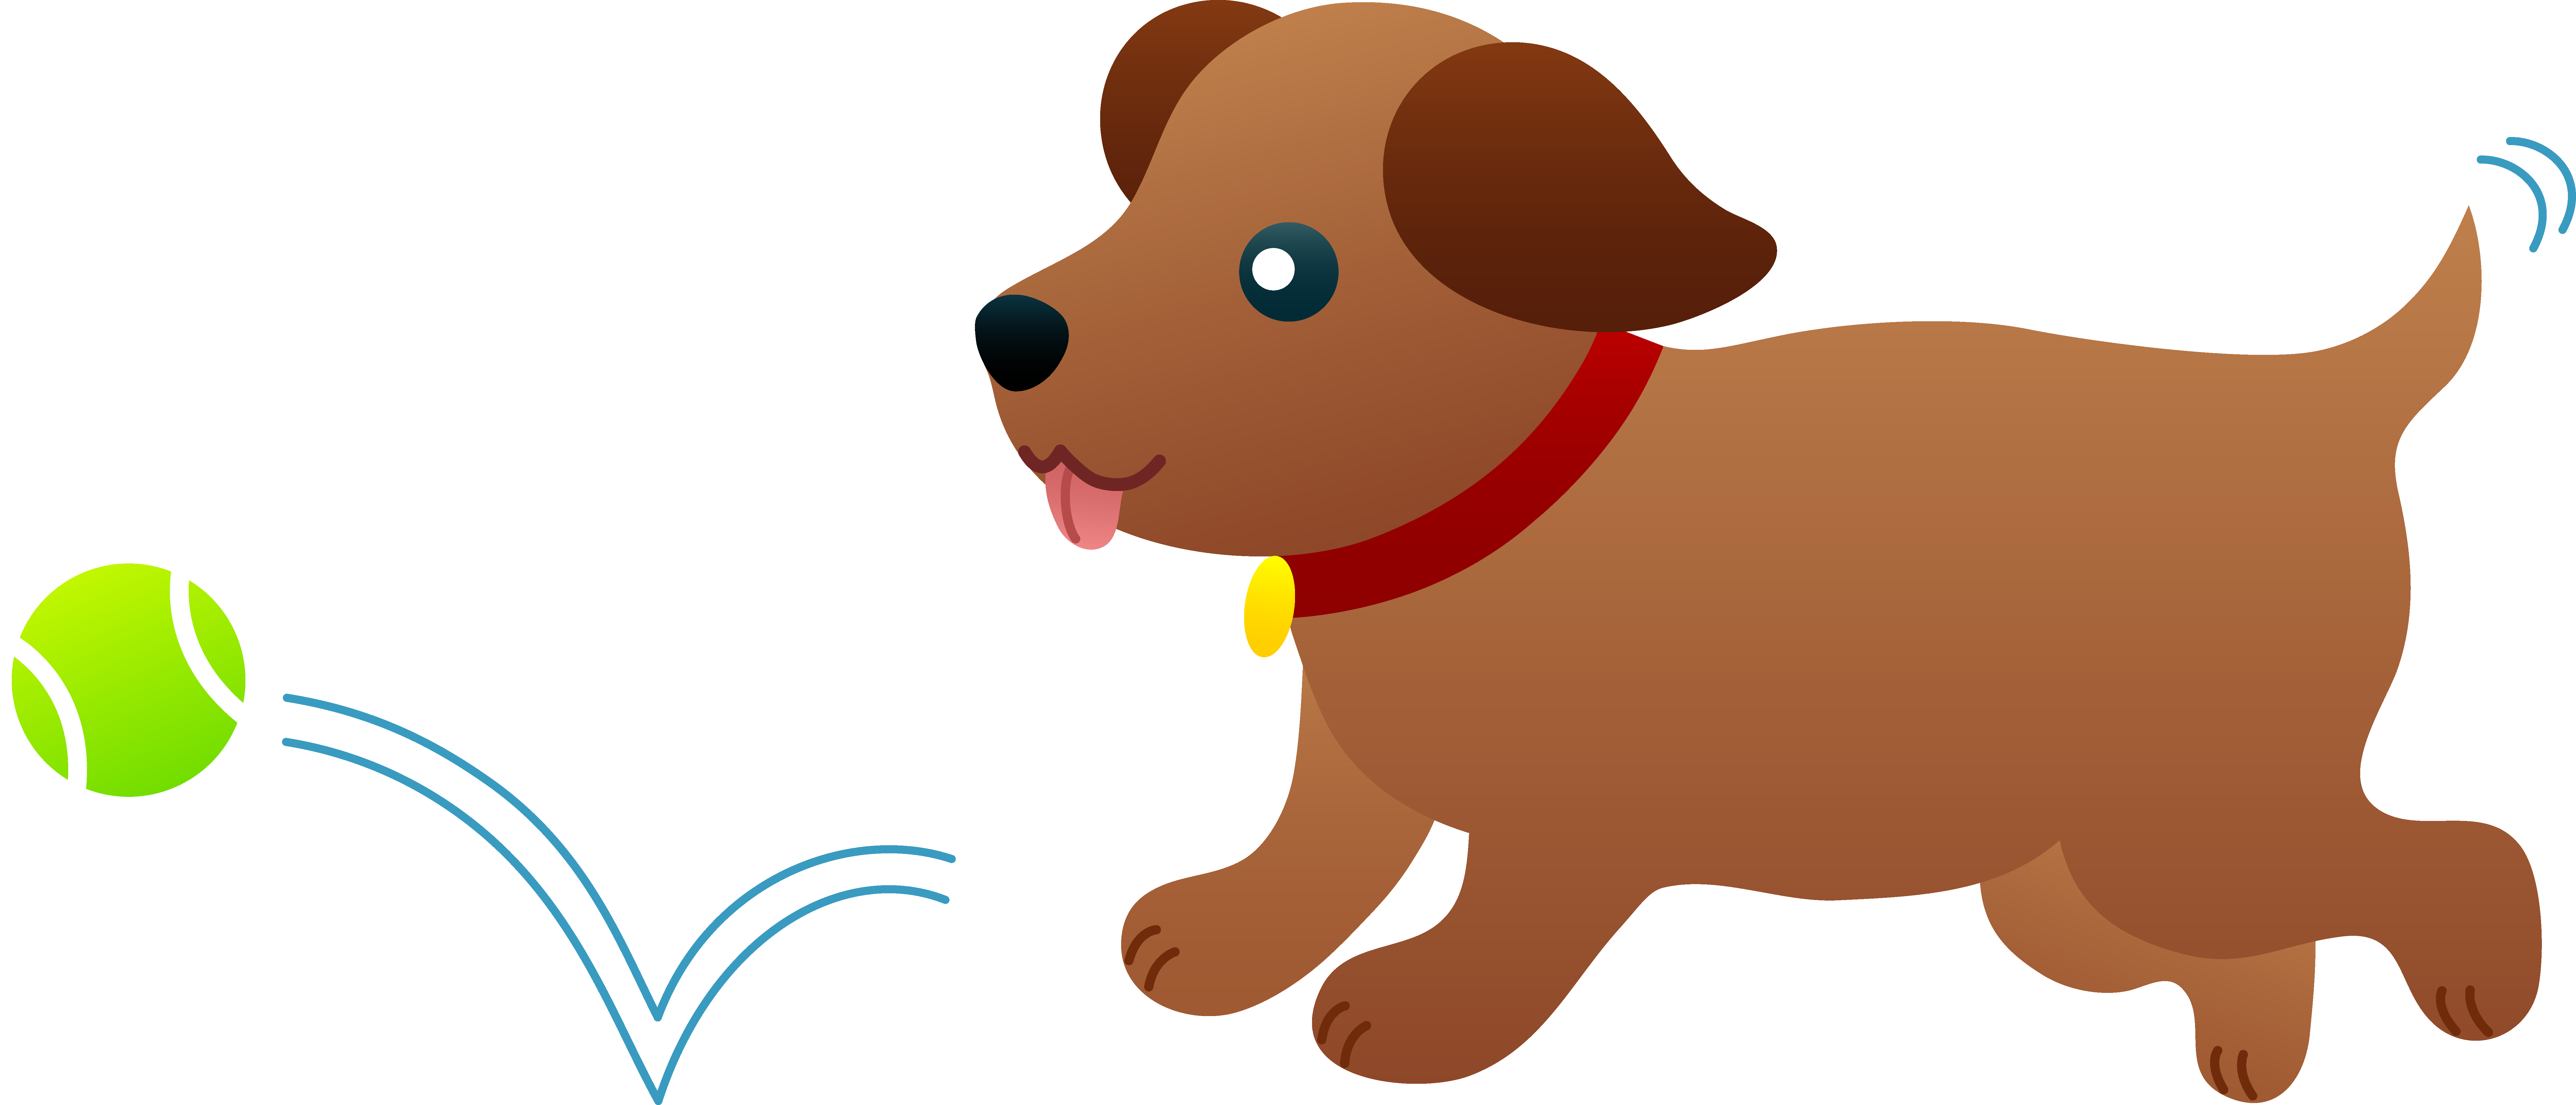 puppy clipart - Google Search